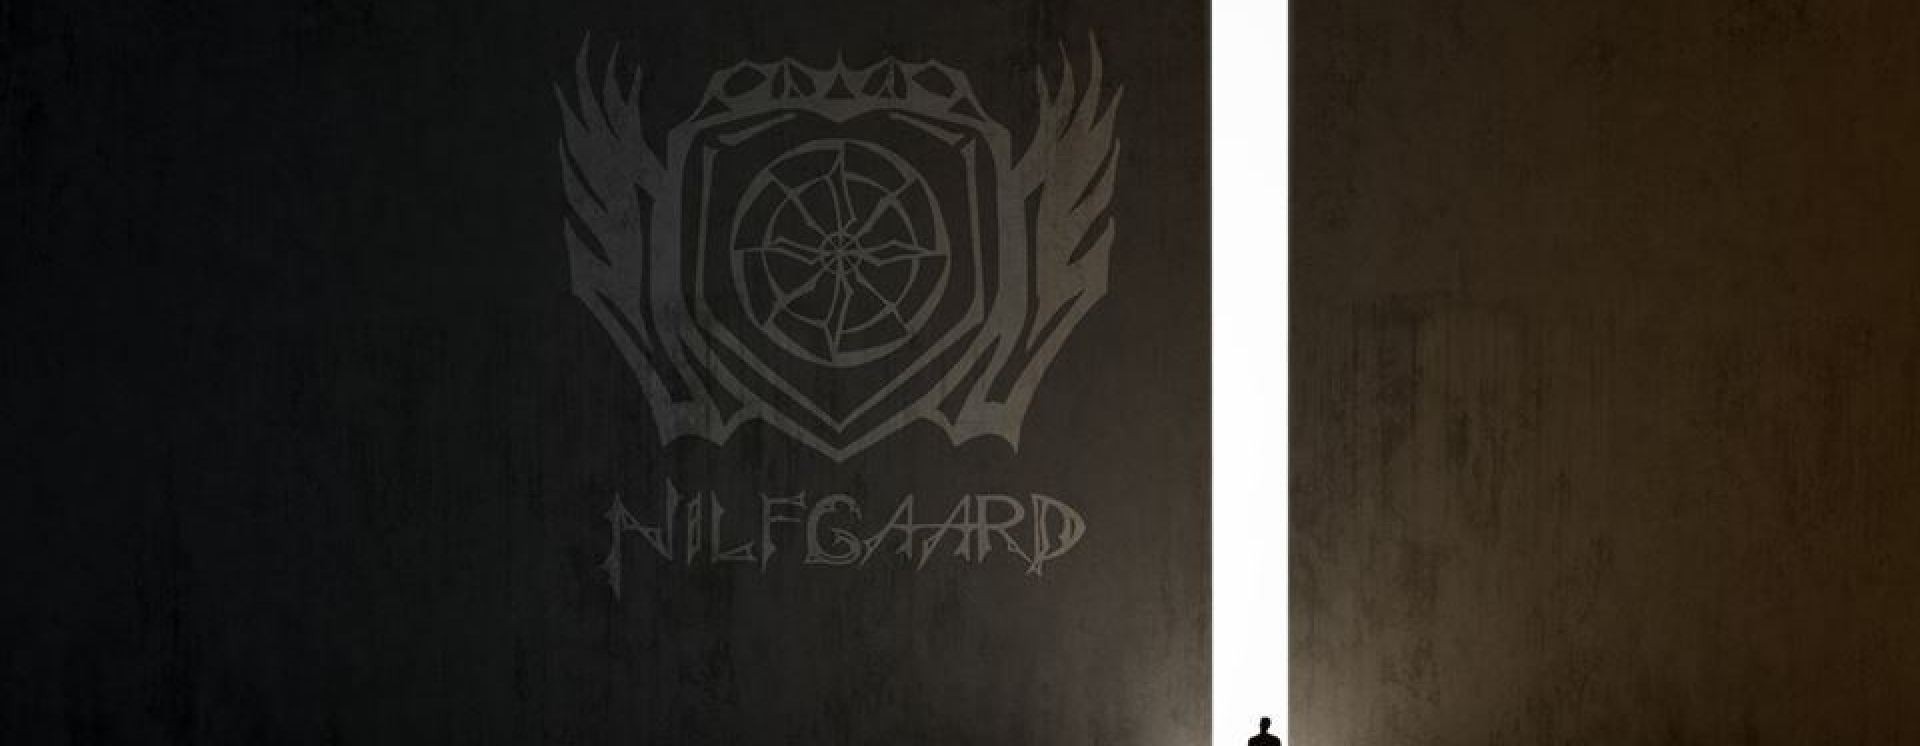 Witcher Fans Raising Hell Over Nilfgaardian Armor Design | COGconnected